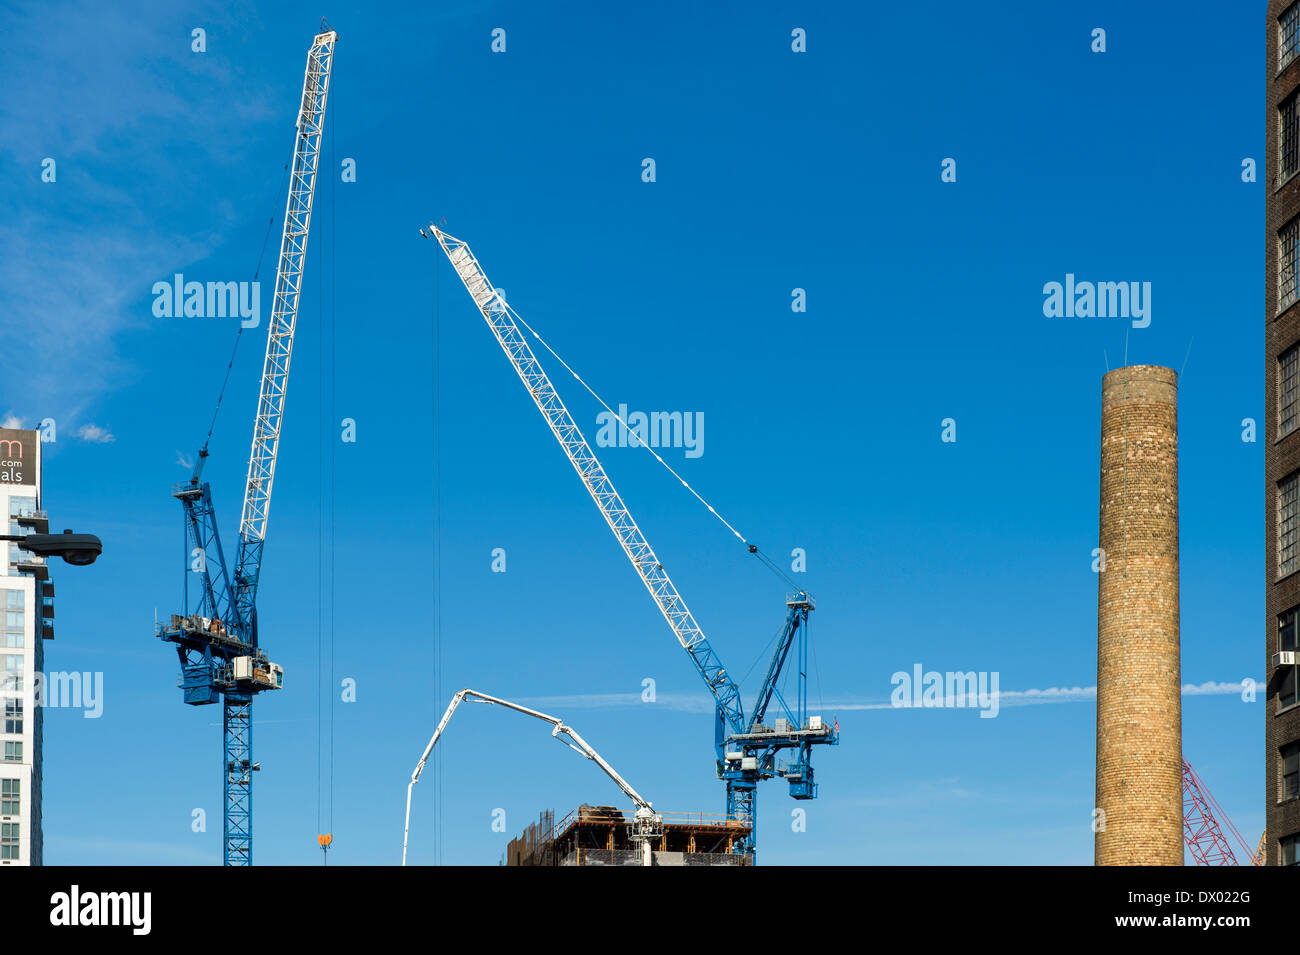 Construction cranes at 30th Street and 10th Avenue, Manhattan, New York. Stock Photo